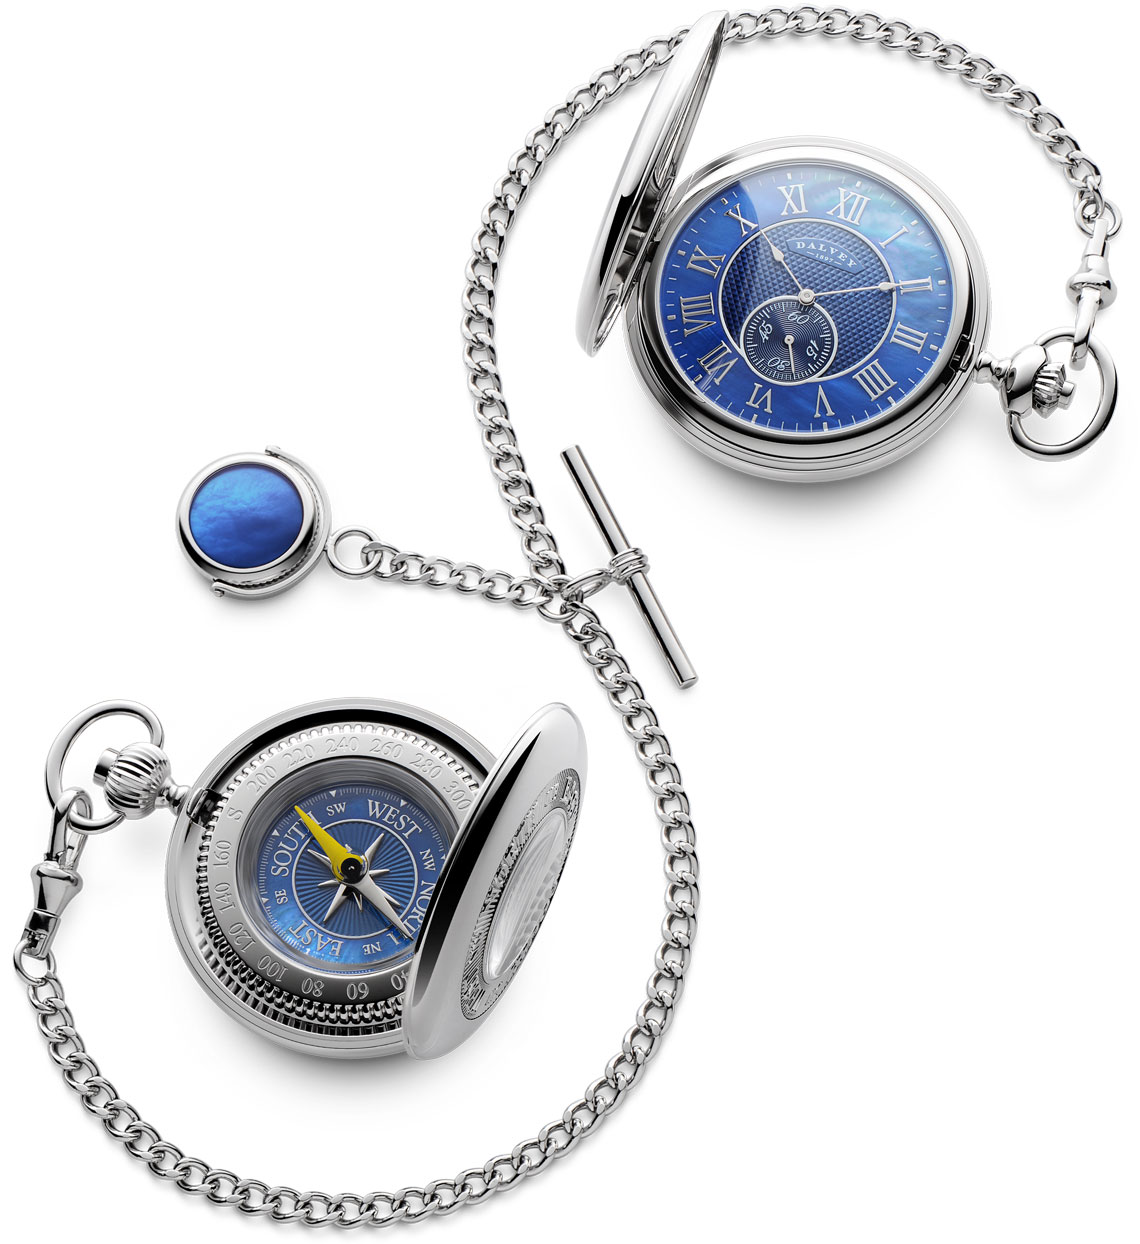 https://www.dalvey.com/media/catalog/product/g/i/gift_set_pocket_watch_and_pocket_compass_and_double_albert_blue_mop--04140_1.jpg?auto=webp&format=pjpg&width=640&height=800&fit=cover